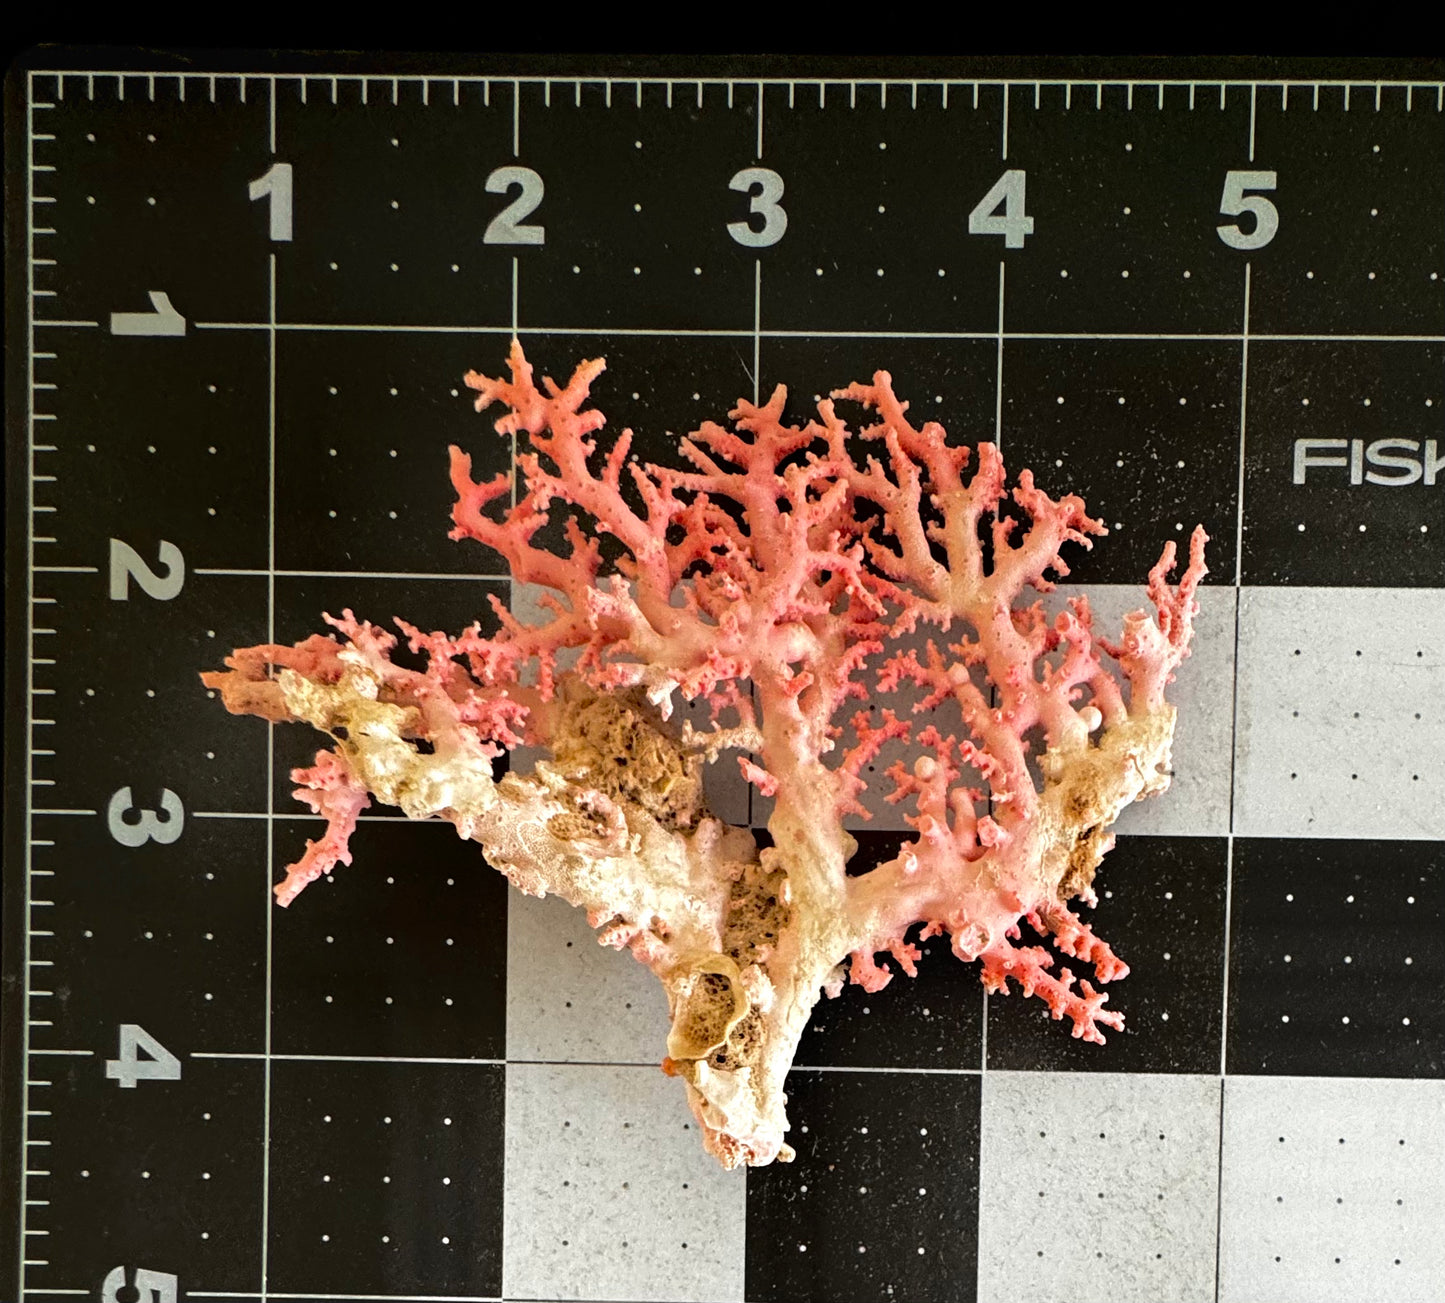 Pink Lace Stylaster Coral (3.5”x4”)